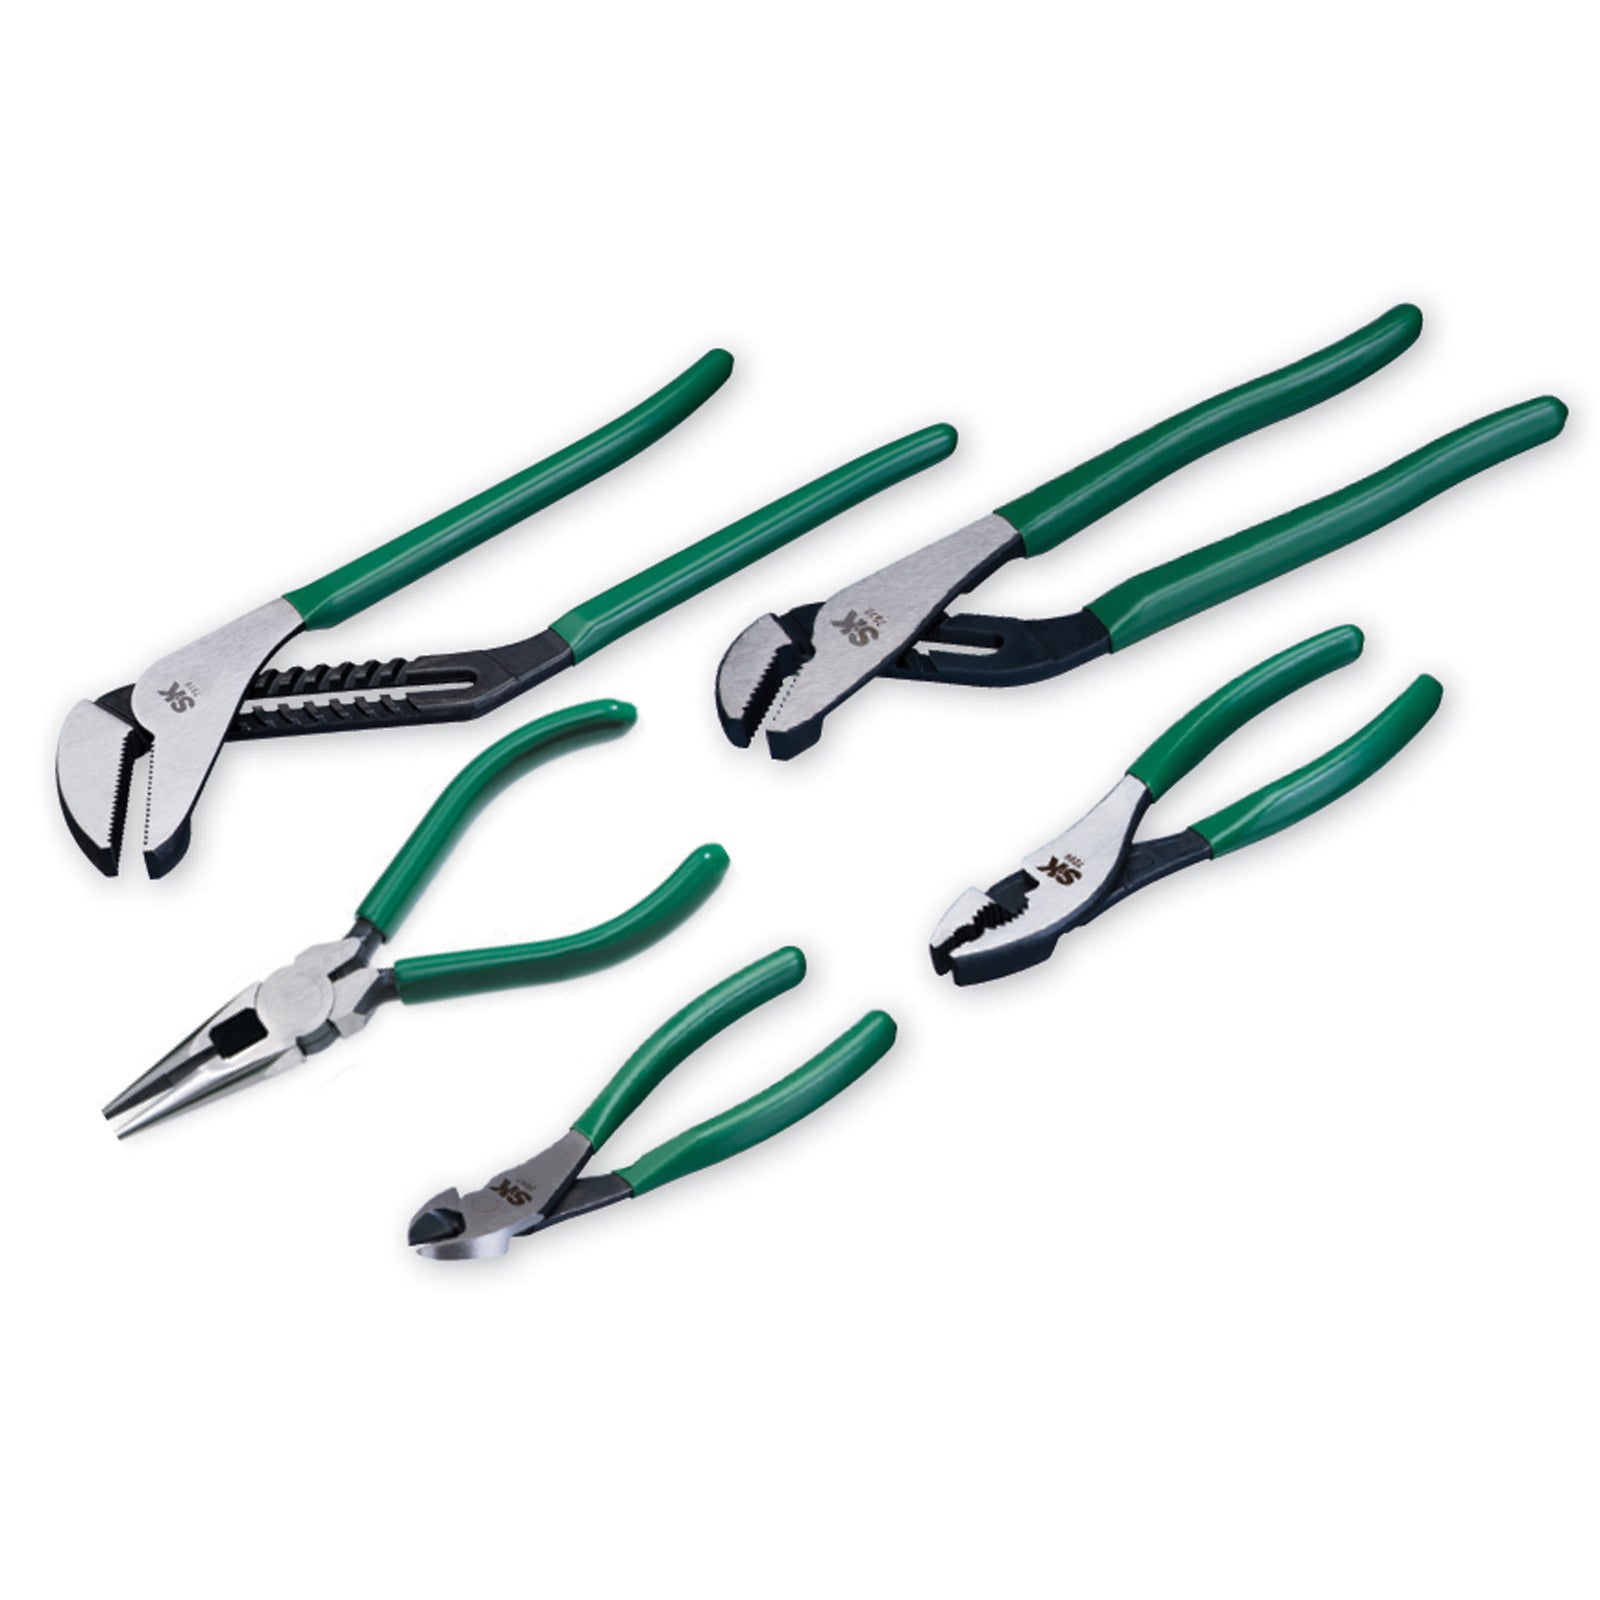 SK PROFESSIONAL TOOLS 18507  End Cutting Pliers 